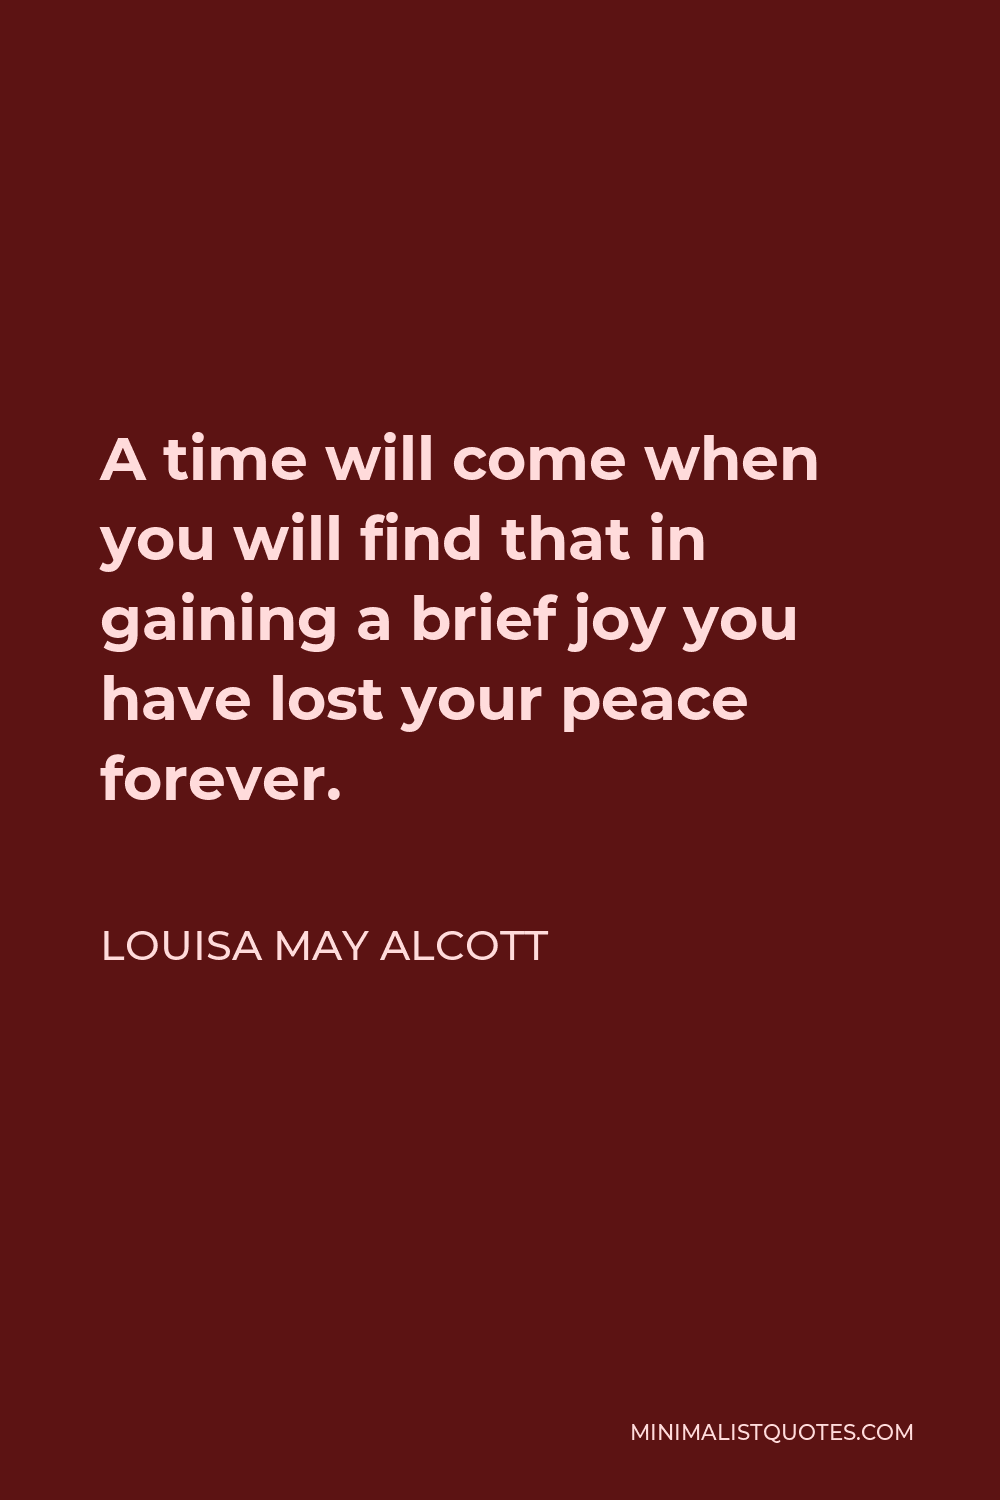 Louisa May Alcott Quote - A time will come when you will find that in gaining a brief joy you have lost your peace forever.